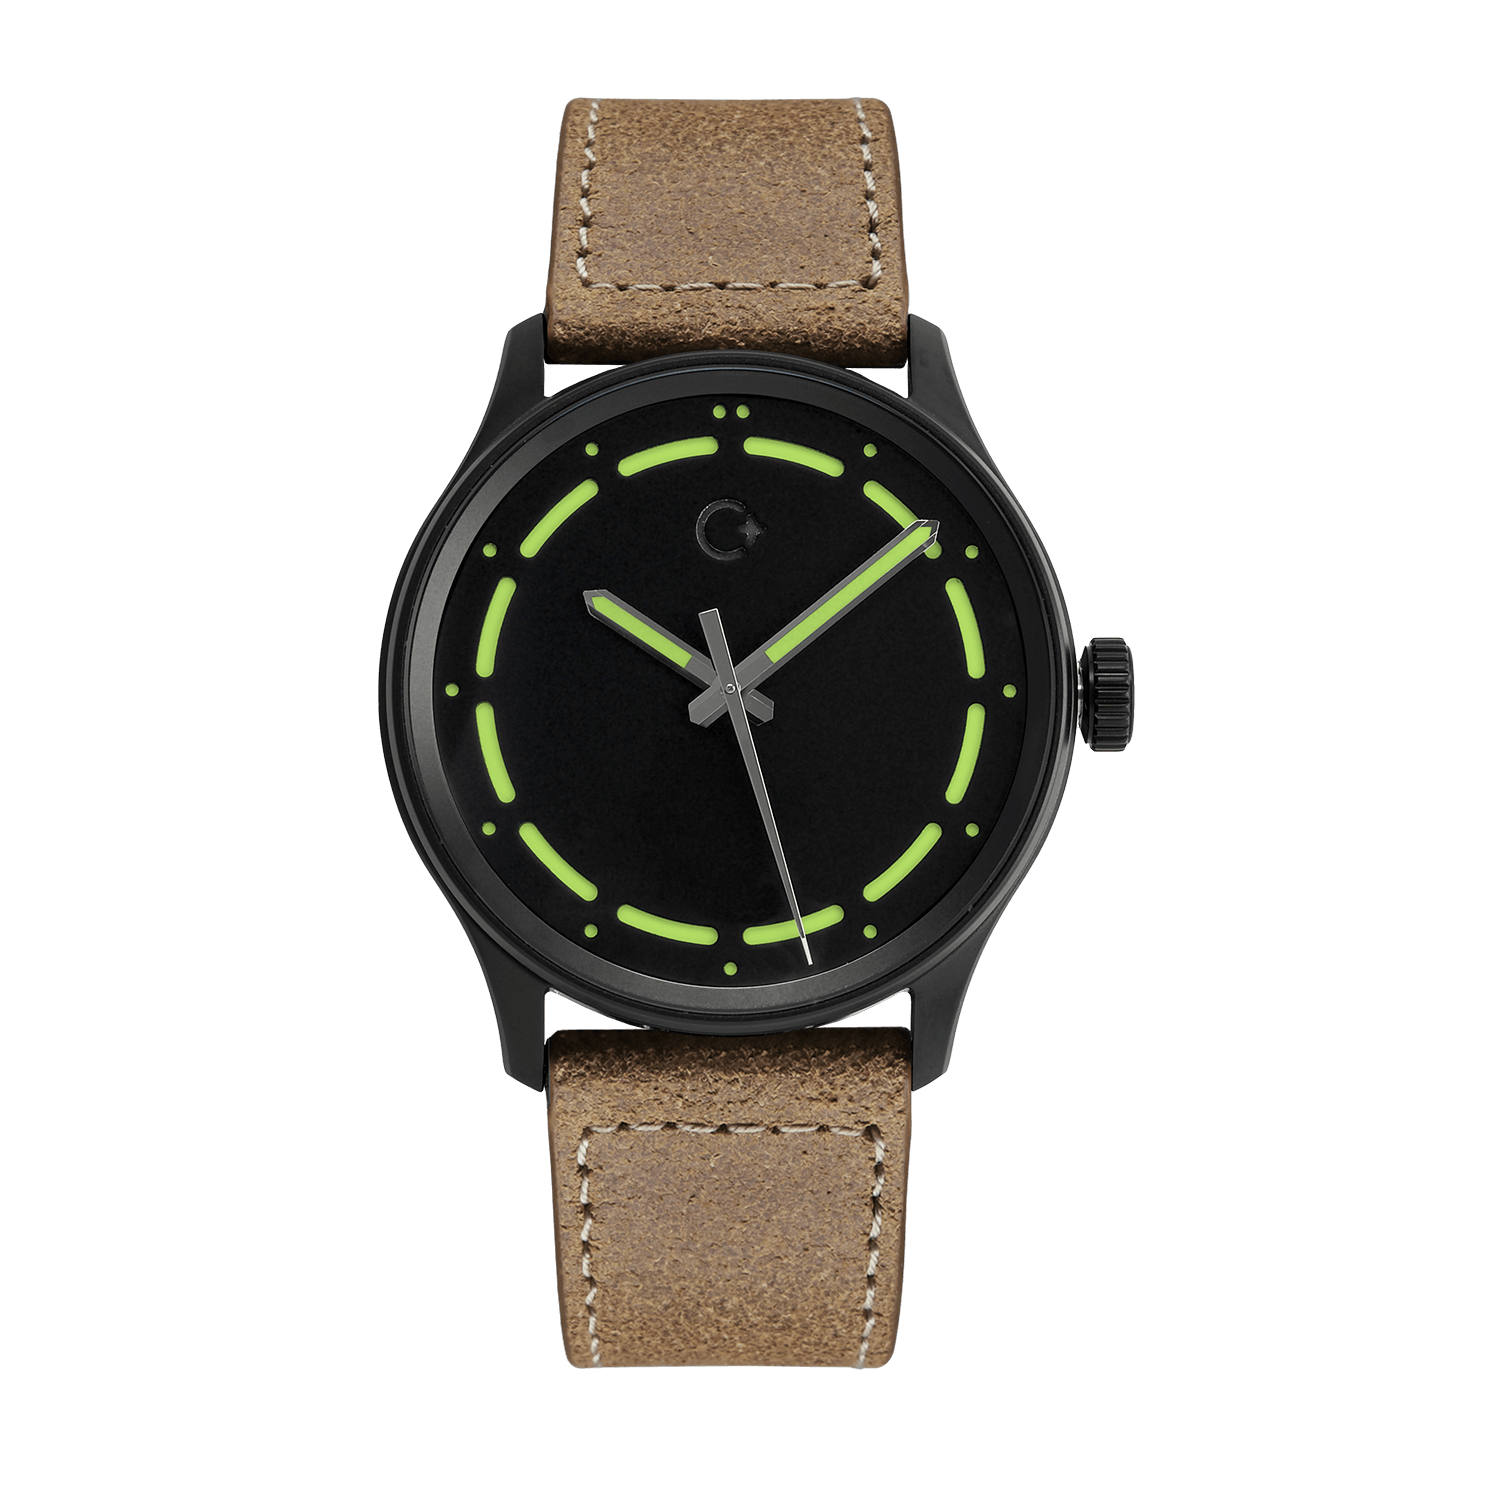 DLC Lime NanoBlack watch, super black watch face, brown leather strap, 42mm, waterproof up to 100m